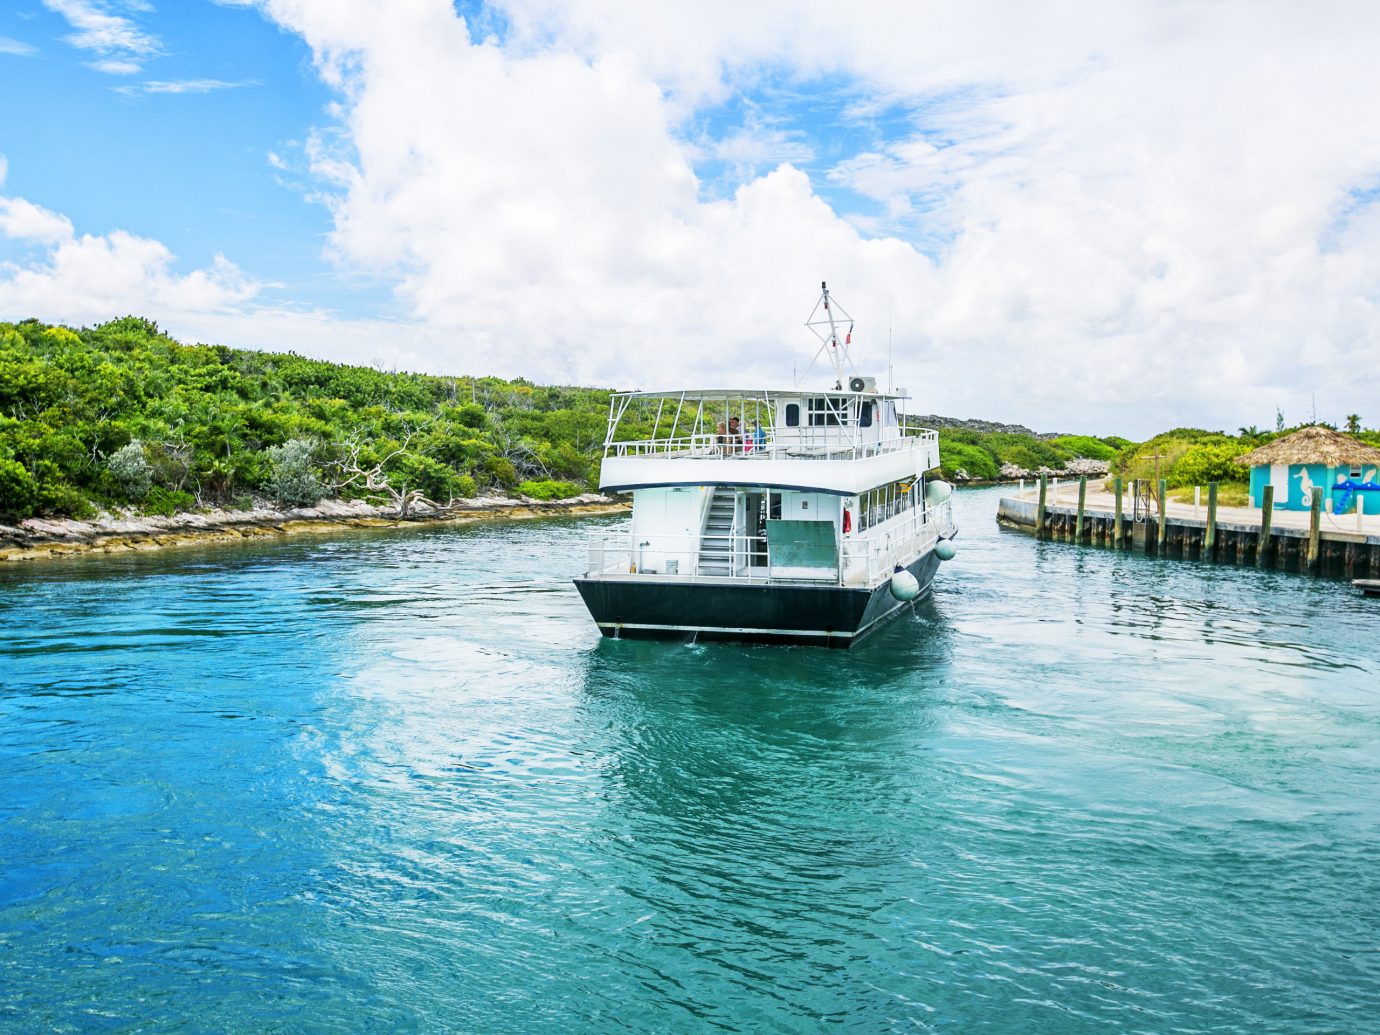 Beach Trip Ideas water sky outdoor Boat landform Sea geographical feature vehicle vacation Ocean shore ferry bay channel Coast caribbean passenger ship waterway Island ship traveling day